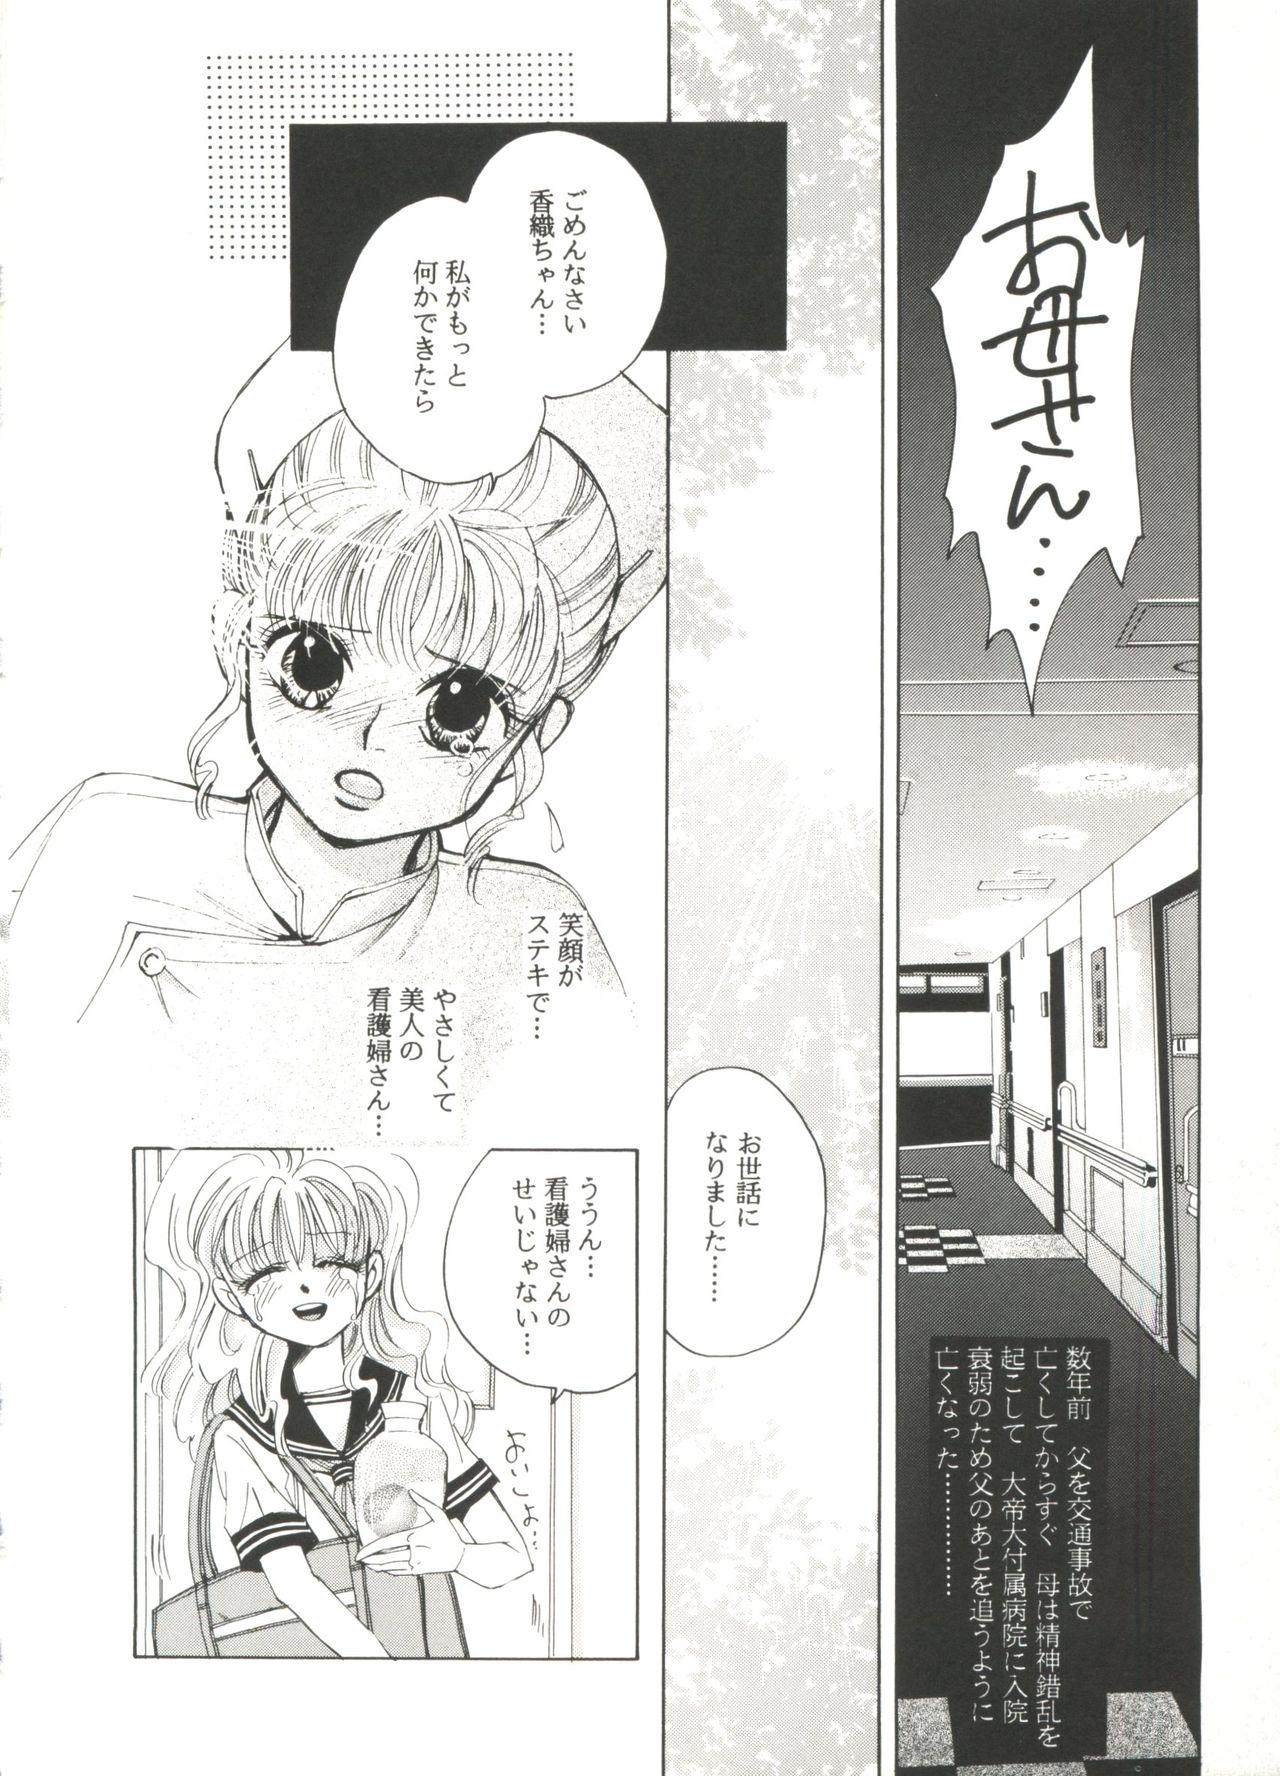 Rub Doujin Anthology Bishoujo a La Carte 8 - Sailor moon King of fighters Magic knight rayearth Battle athletes Saber marionette Kodomo no omocha Amatures Gone Wild - Page 8